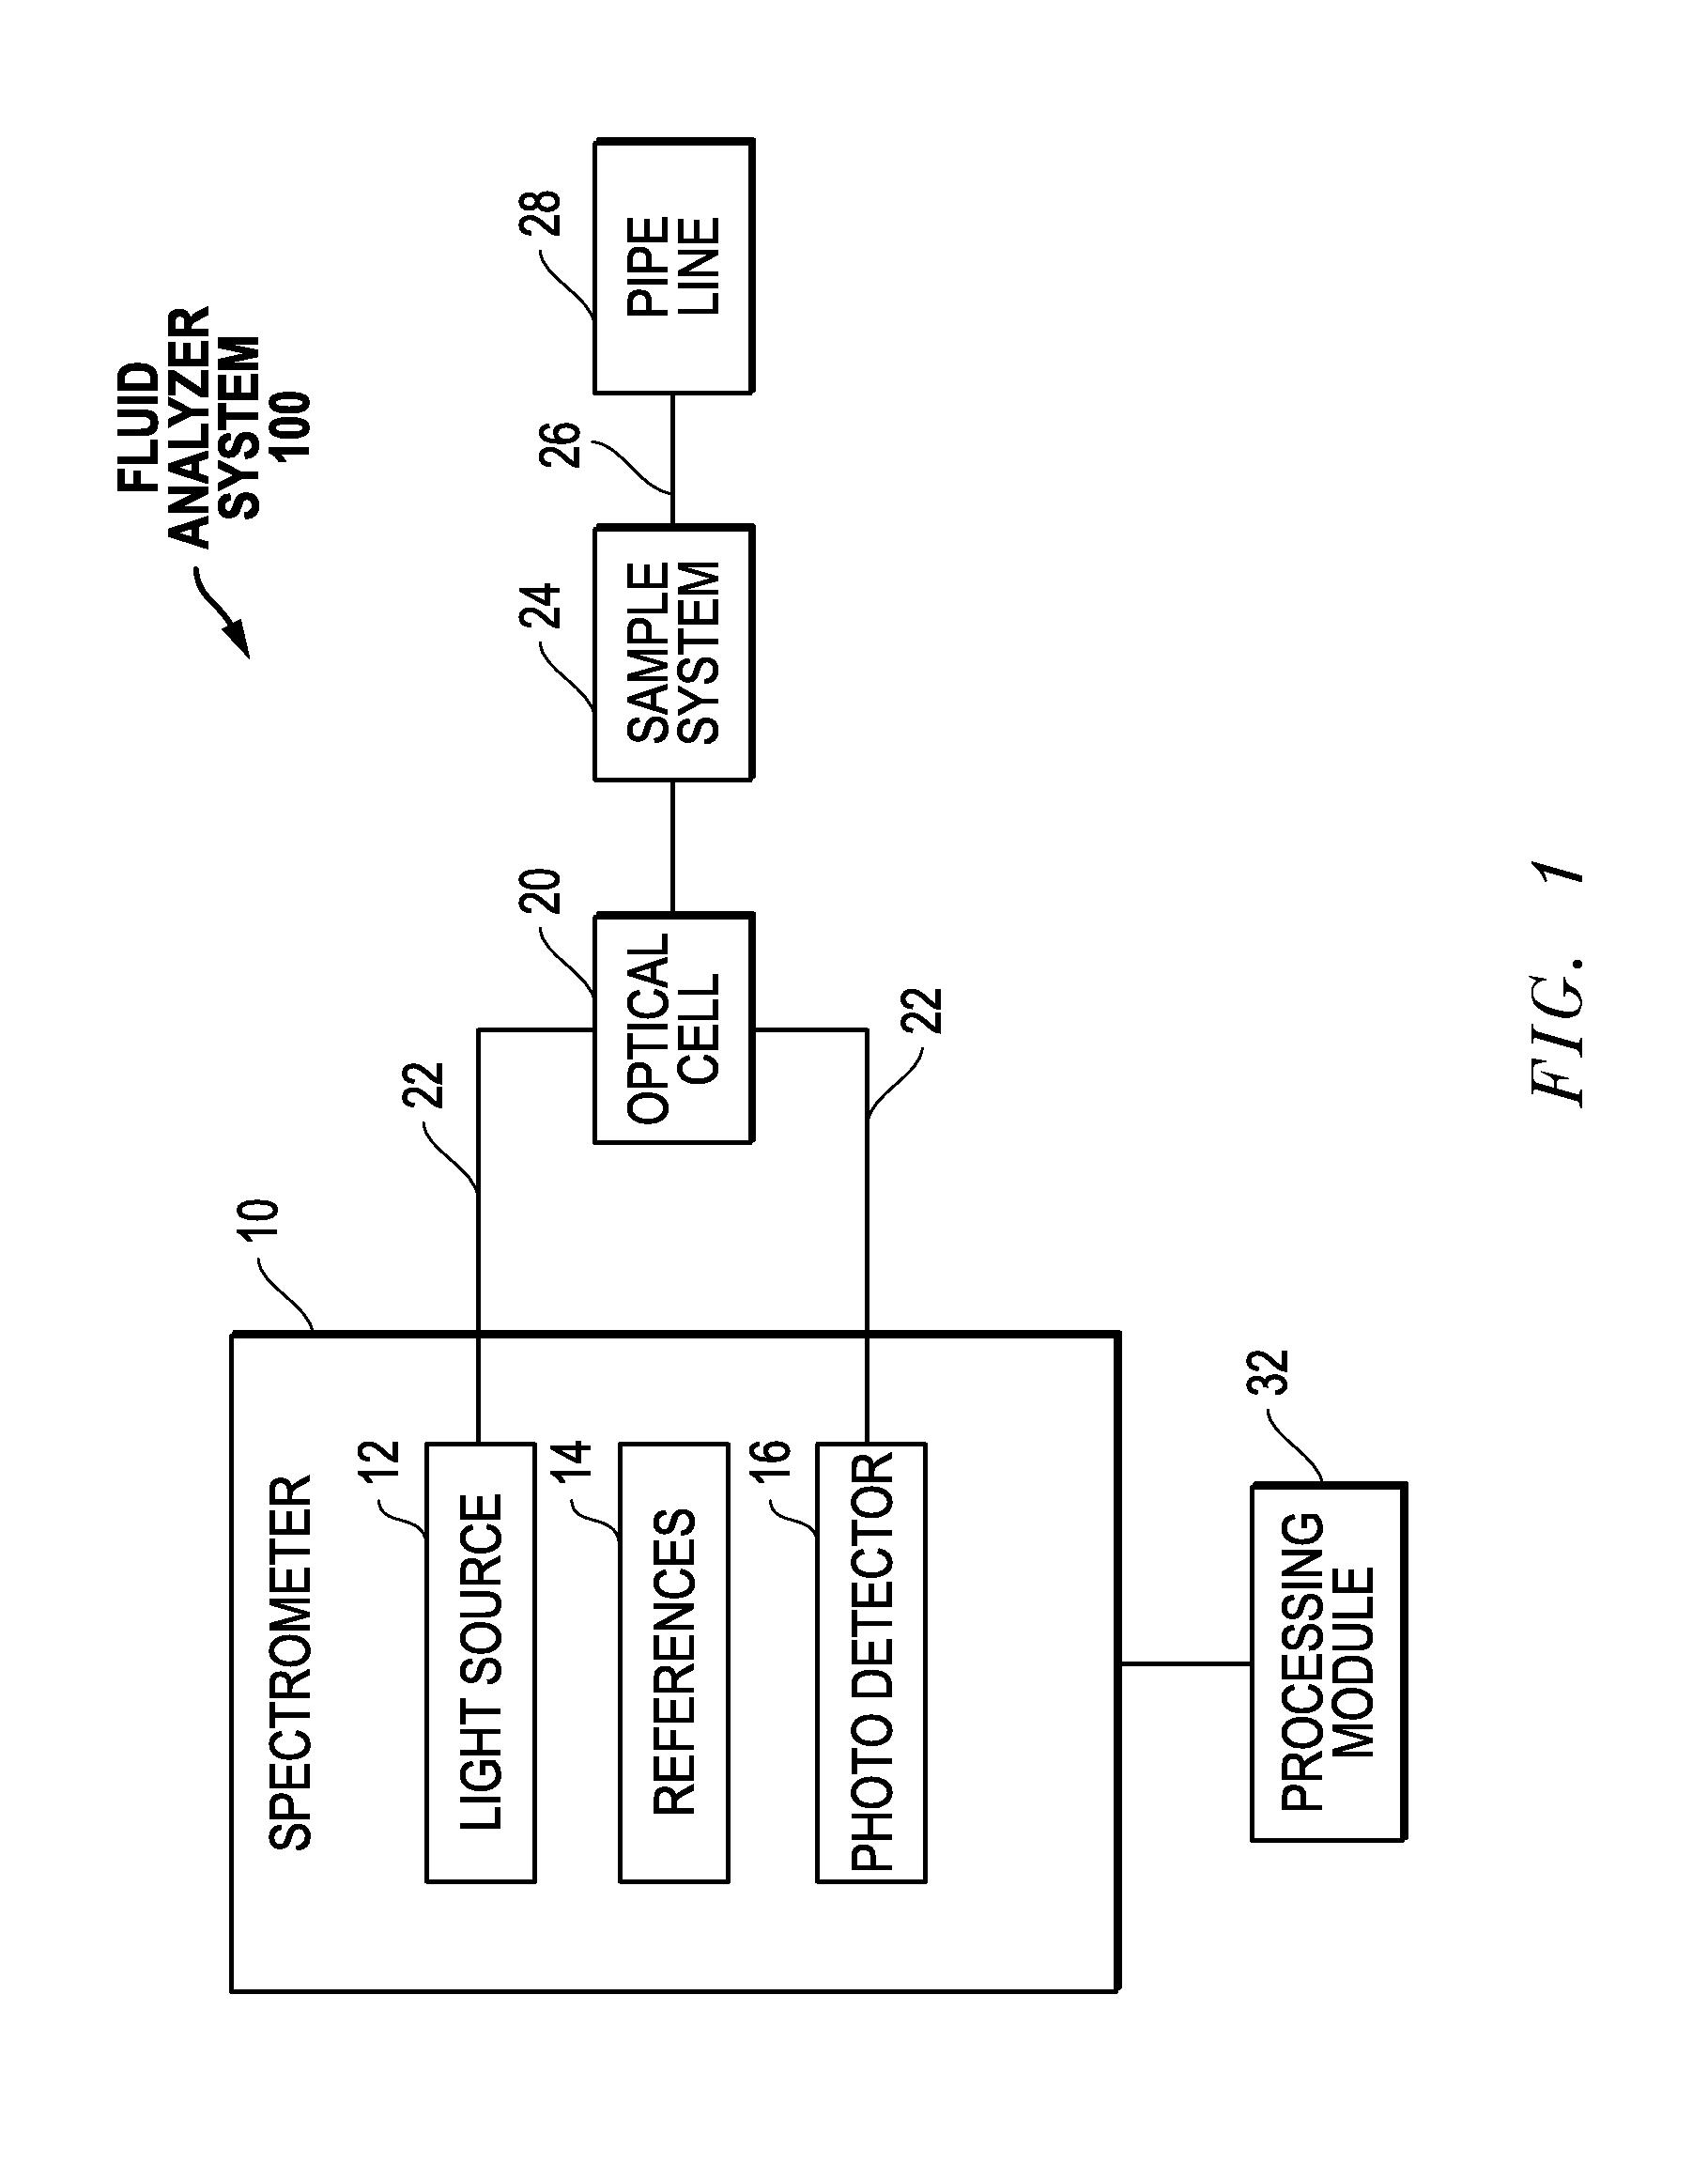 Method and system for determining energy content and detecting contaminants in a fluid stream